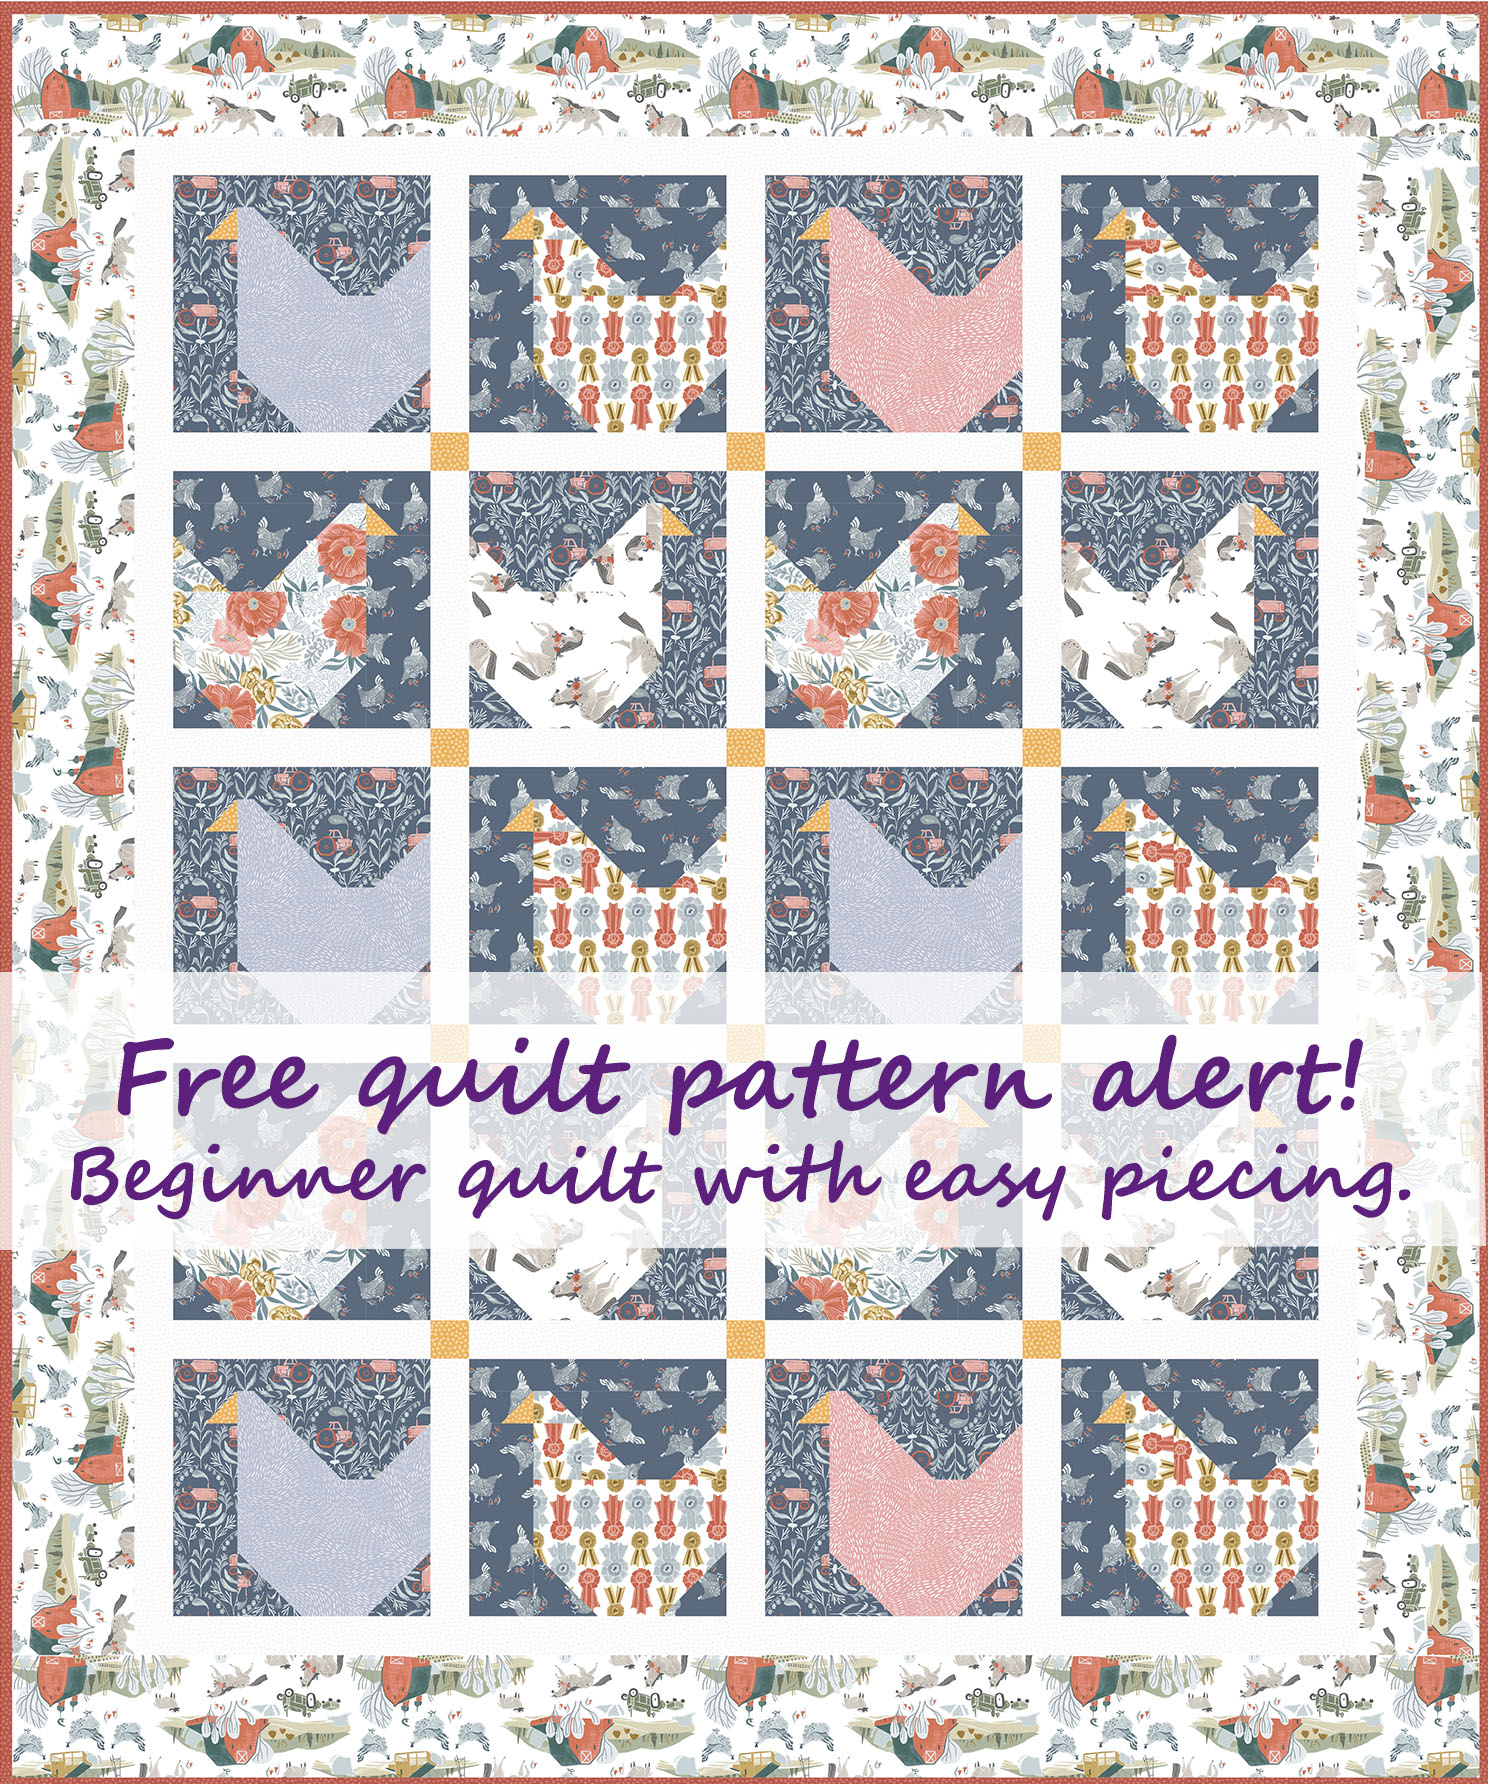 19 Free and Easy Quilt Patterns for Beginners